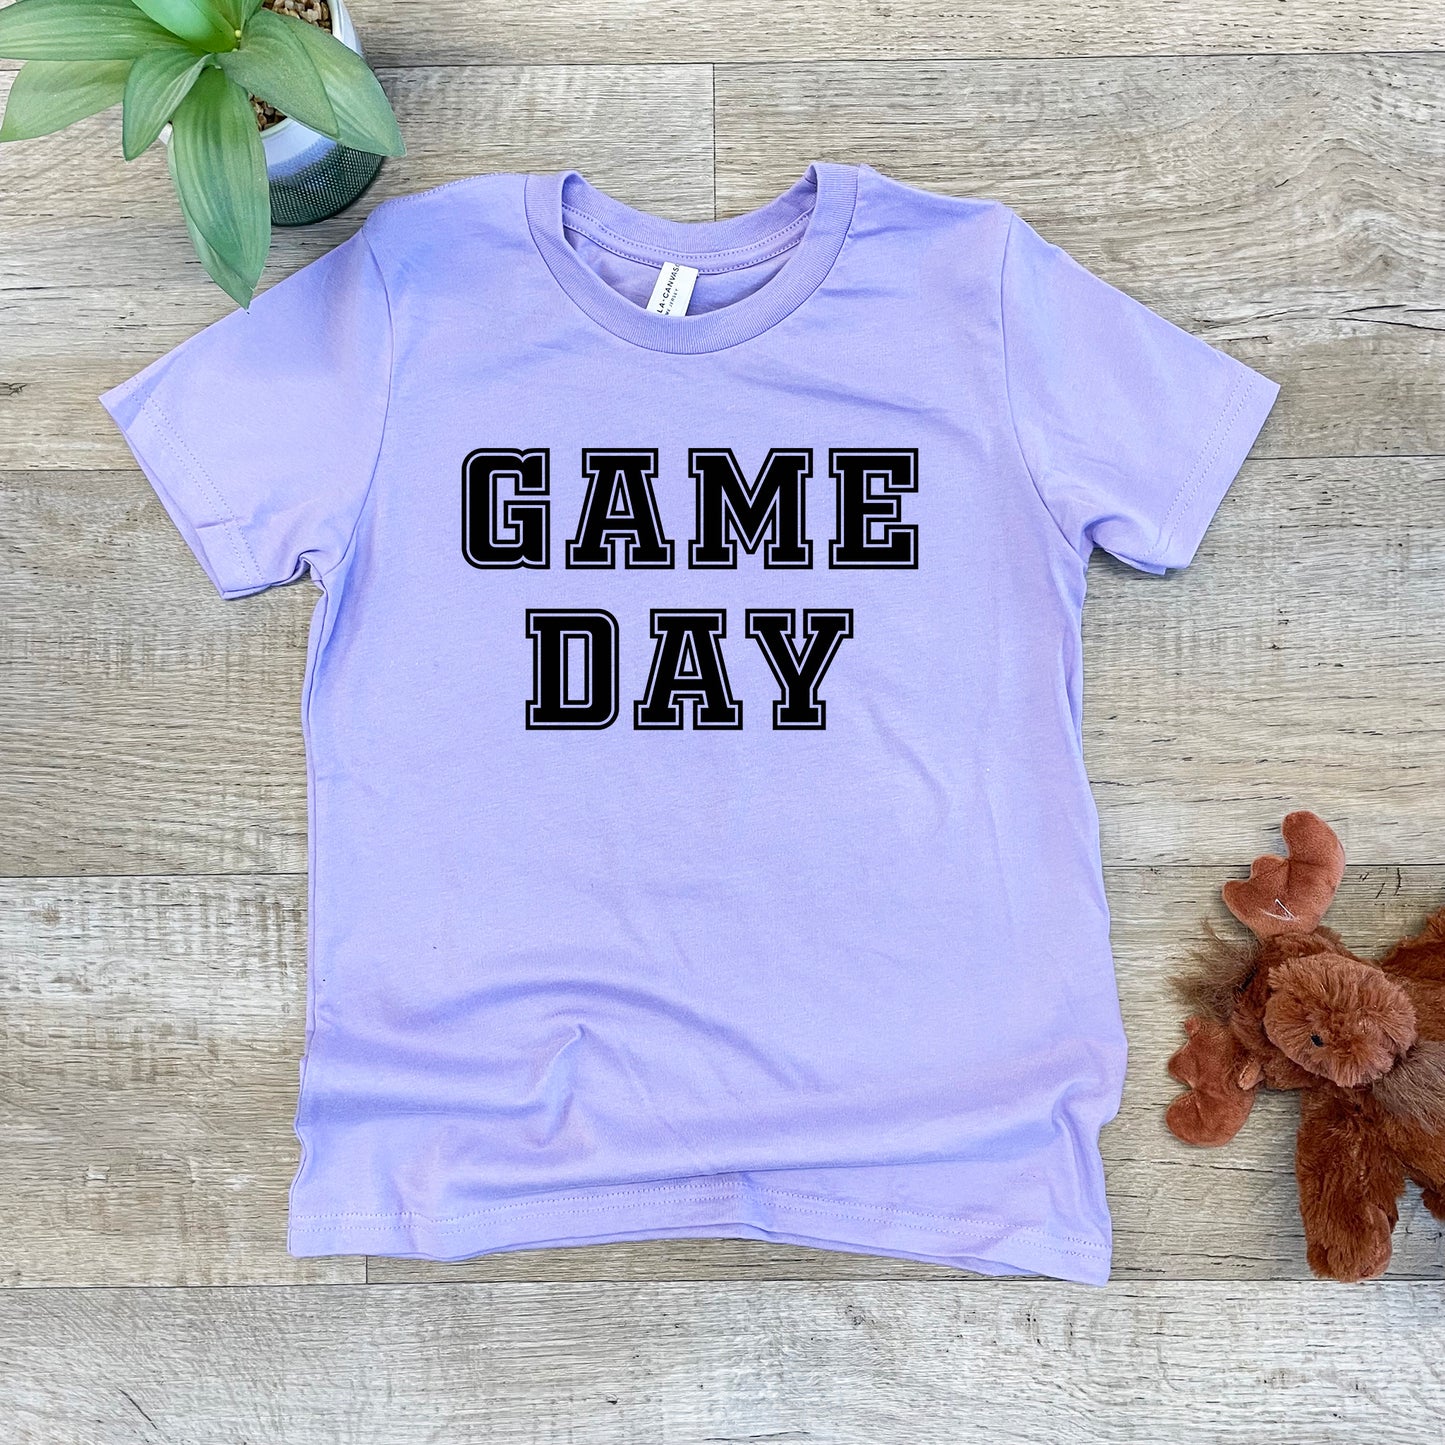 a purple shirt that says game day next to a teddy bear